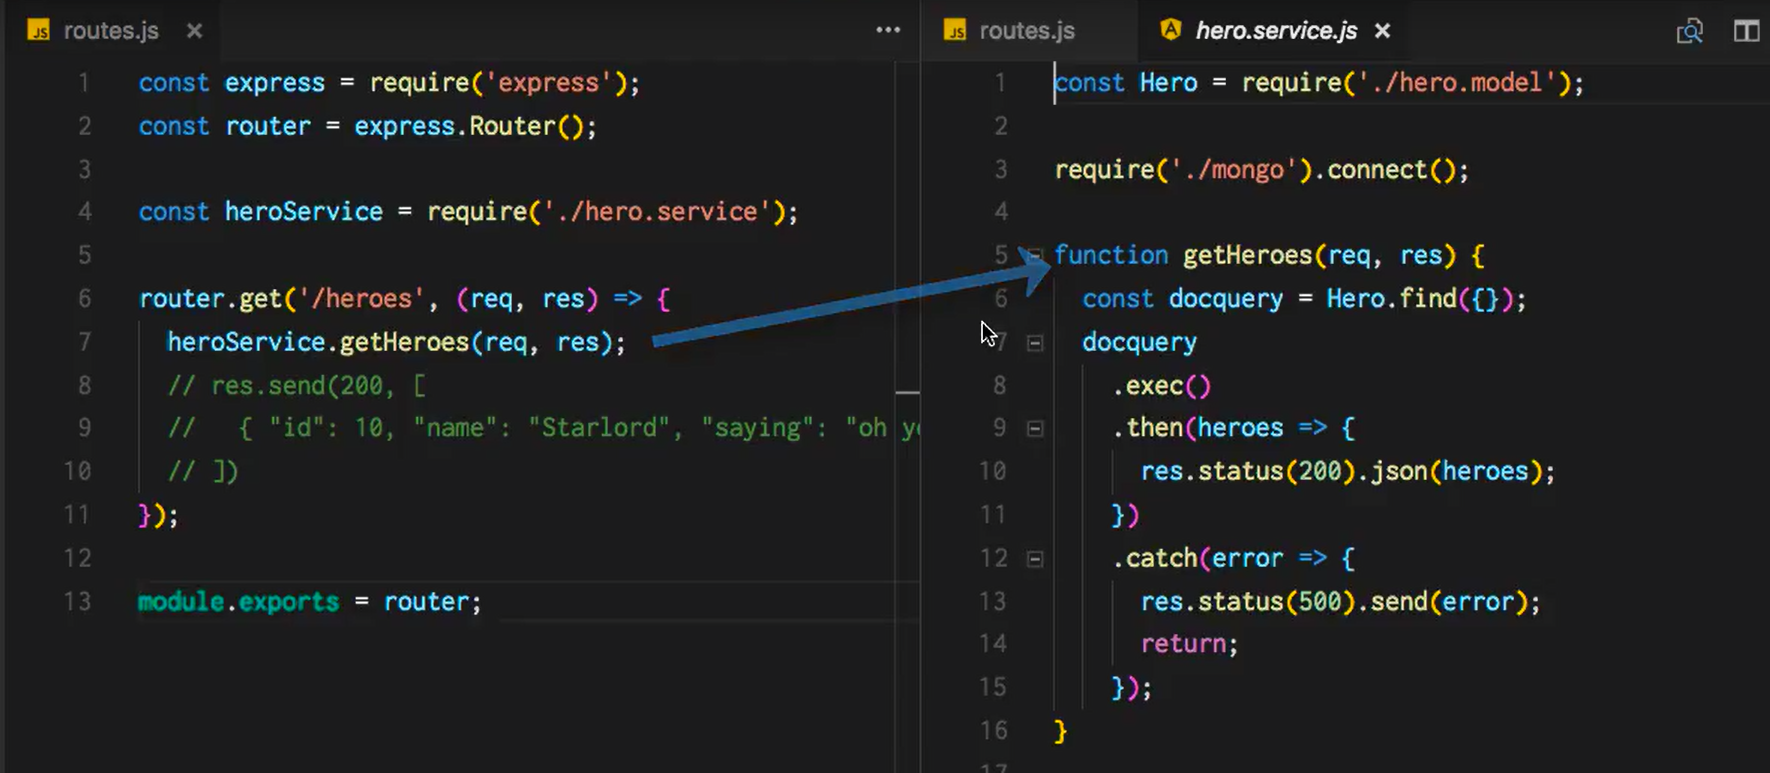 routes.js and hero.service.js in Visual Studio Code